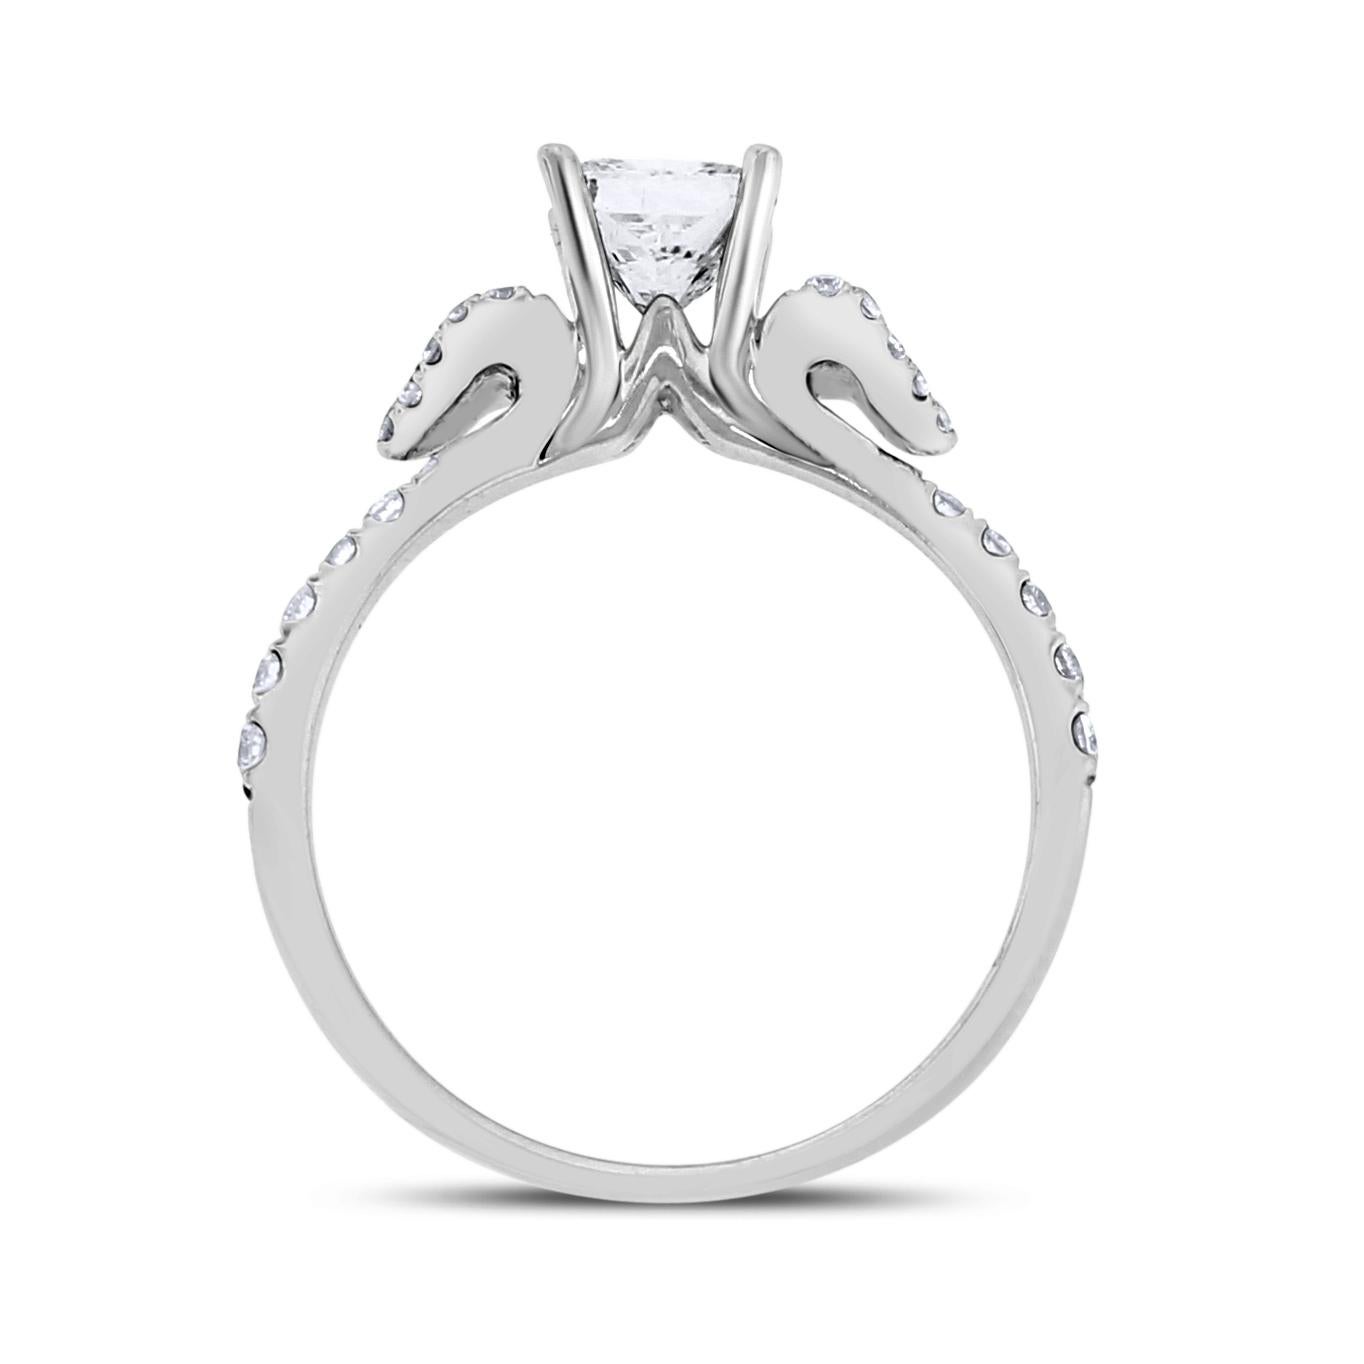 Women's or Men's Beauvince Love Engagement Ring, '0.71 Ct Princess GVS Diamond' in White Gold For Sale